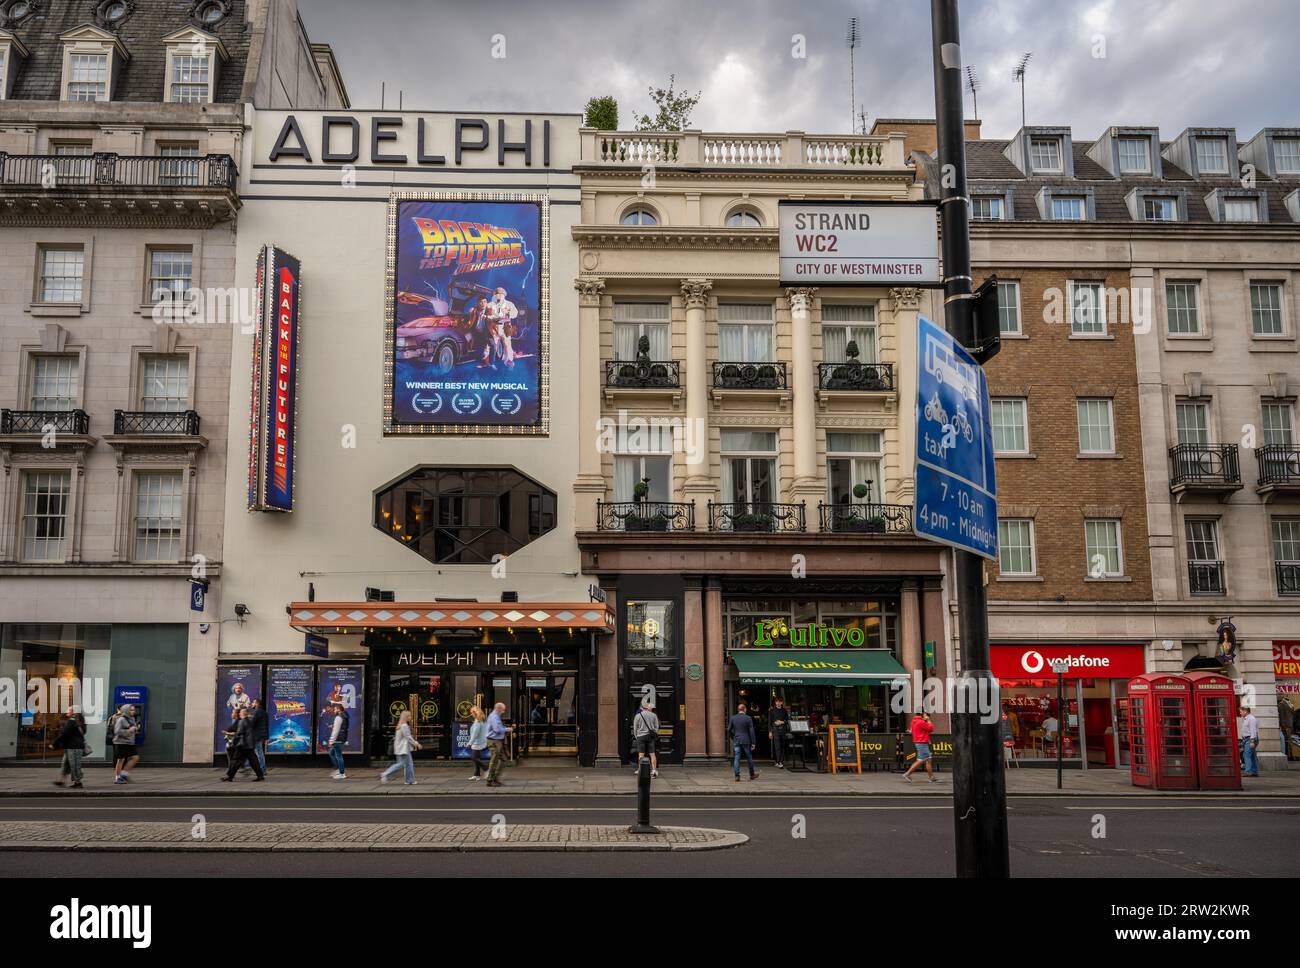 London, UK: The Adelphi Theatre on The Strand in central London. The theater is showing the musical Back to the Future. Stock Photo